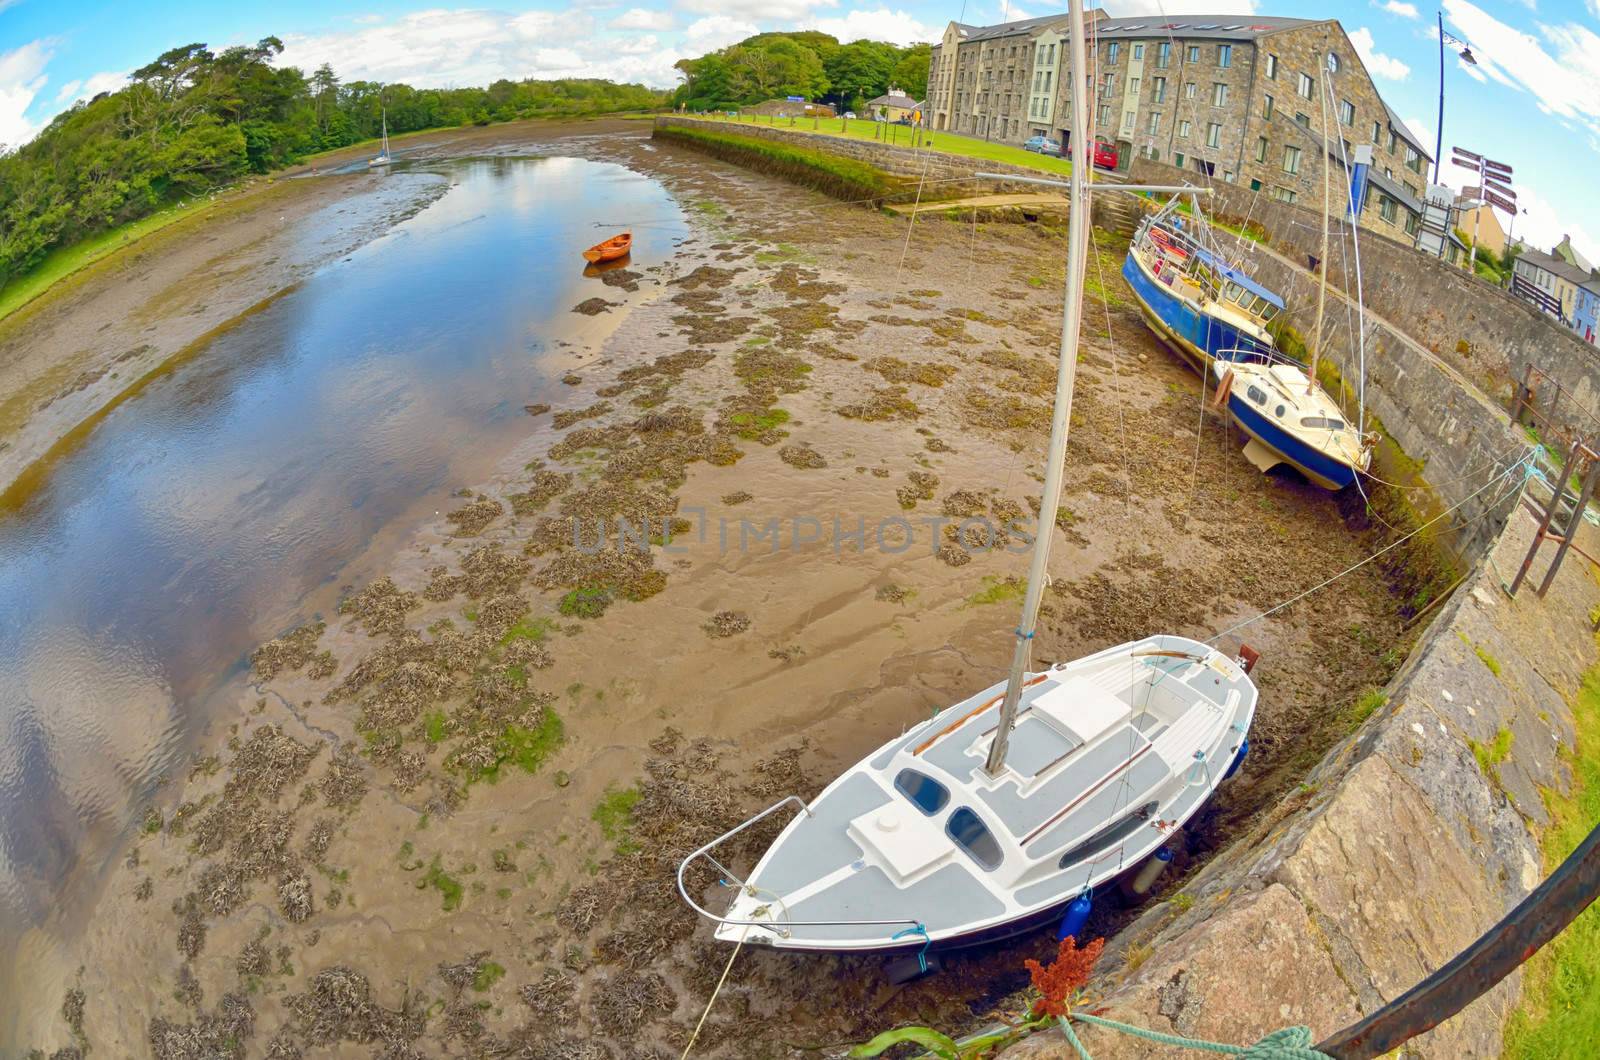 boats on the river shore in ireland